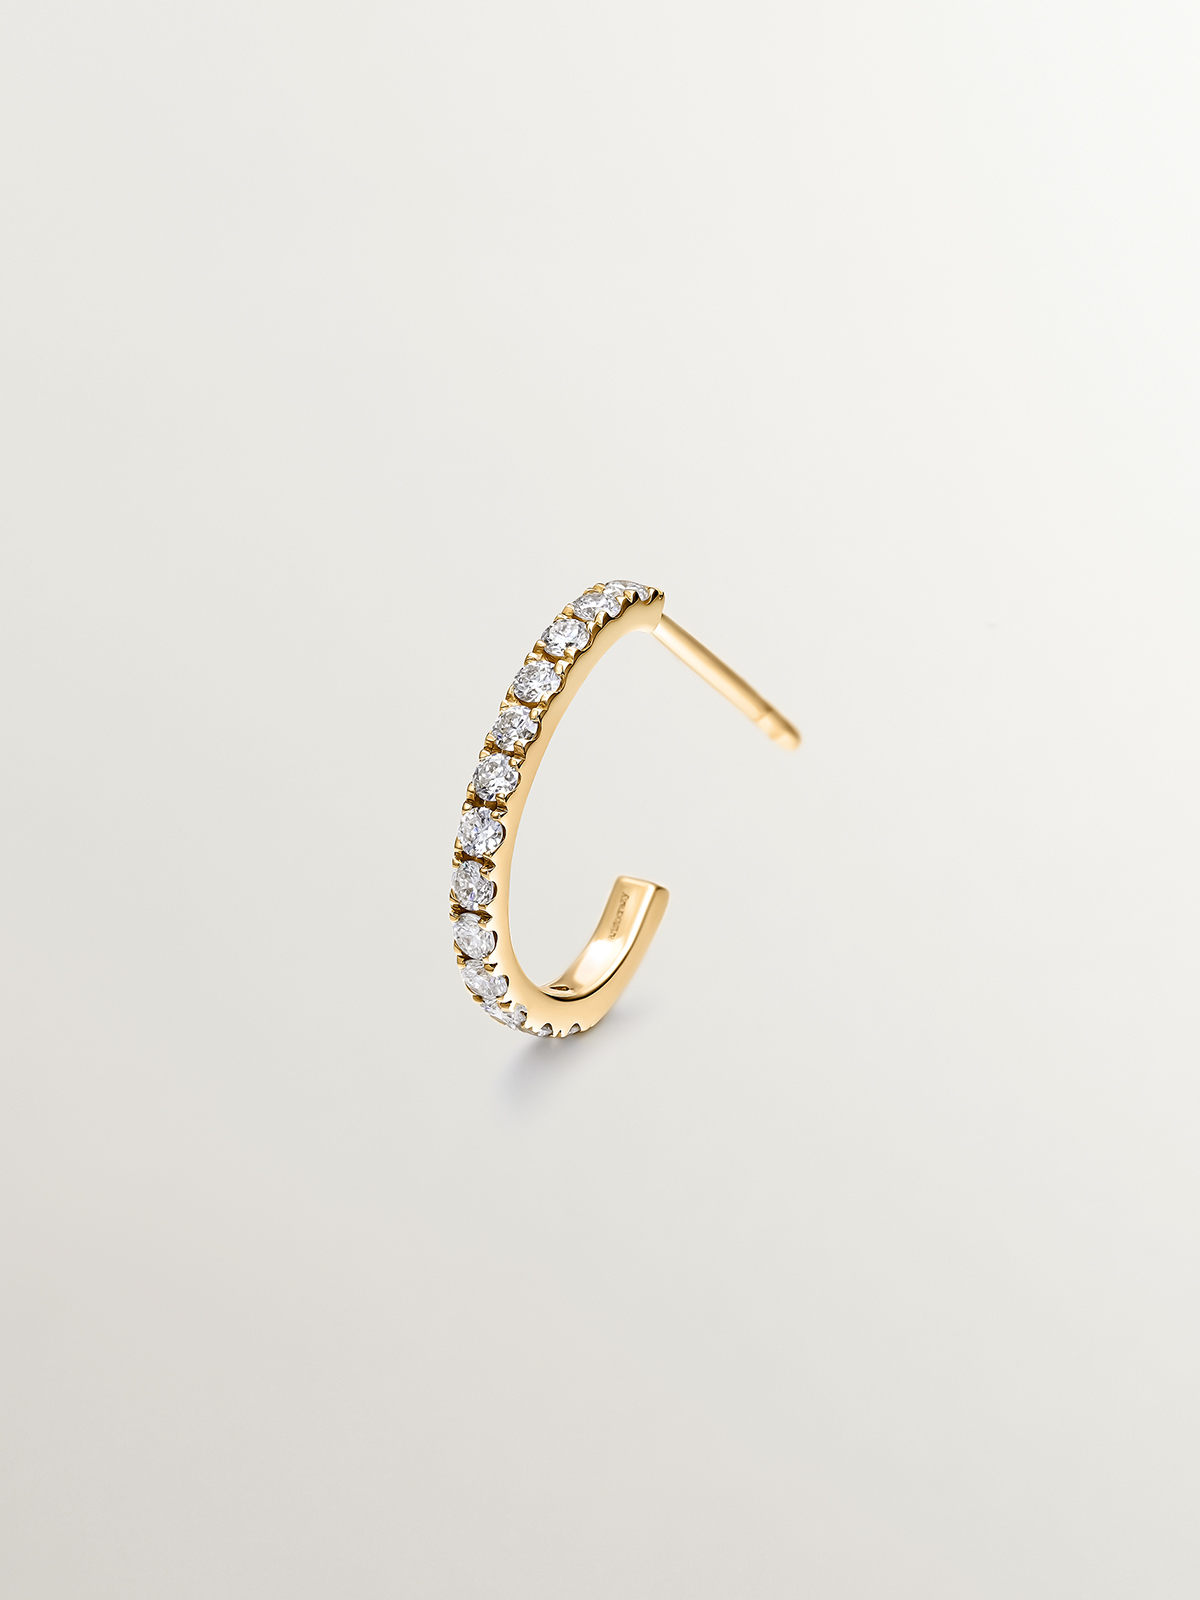 Individual small hoop earring made of 18K yellow gold with 0.20cts diamonds.